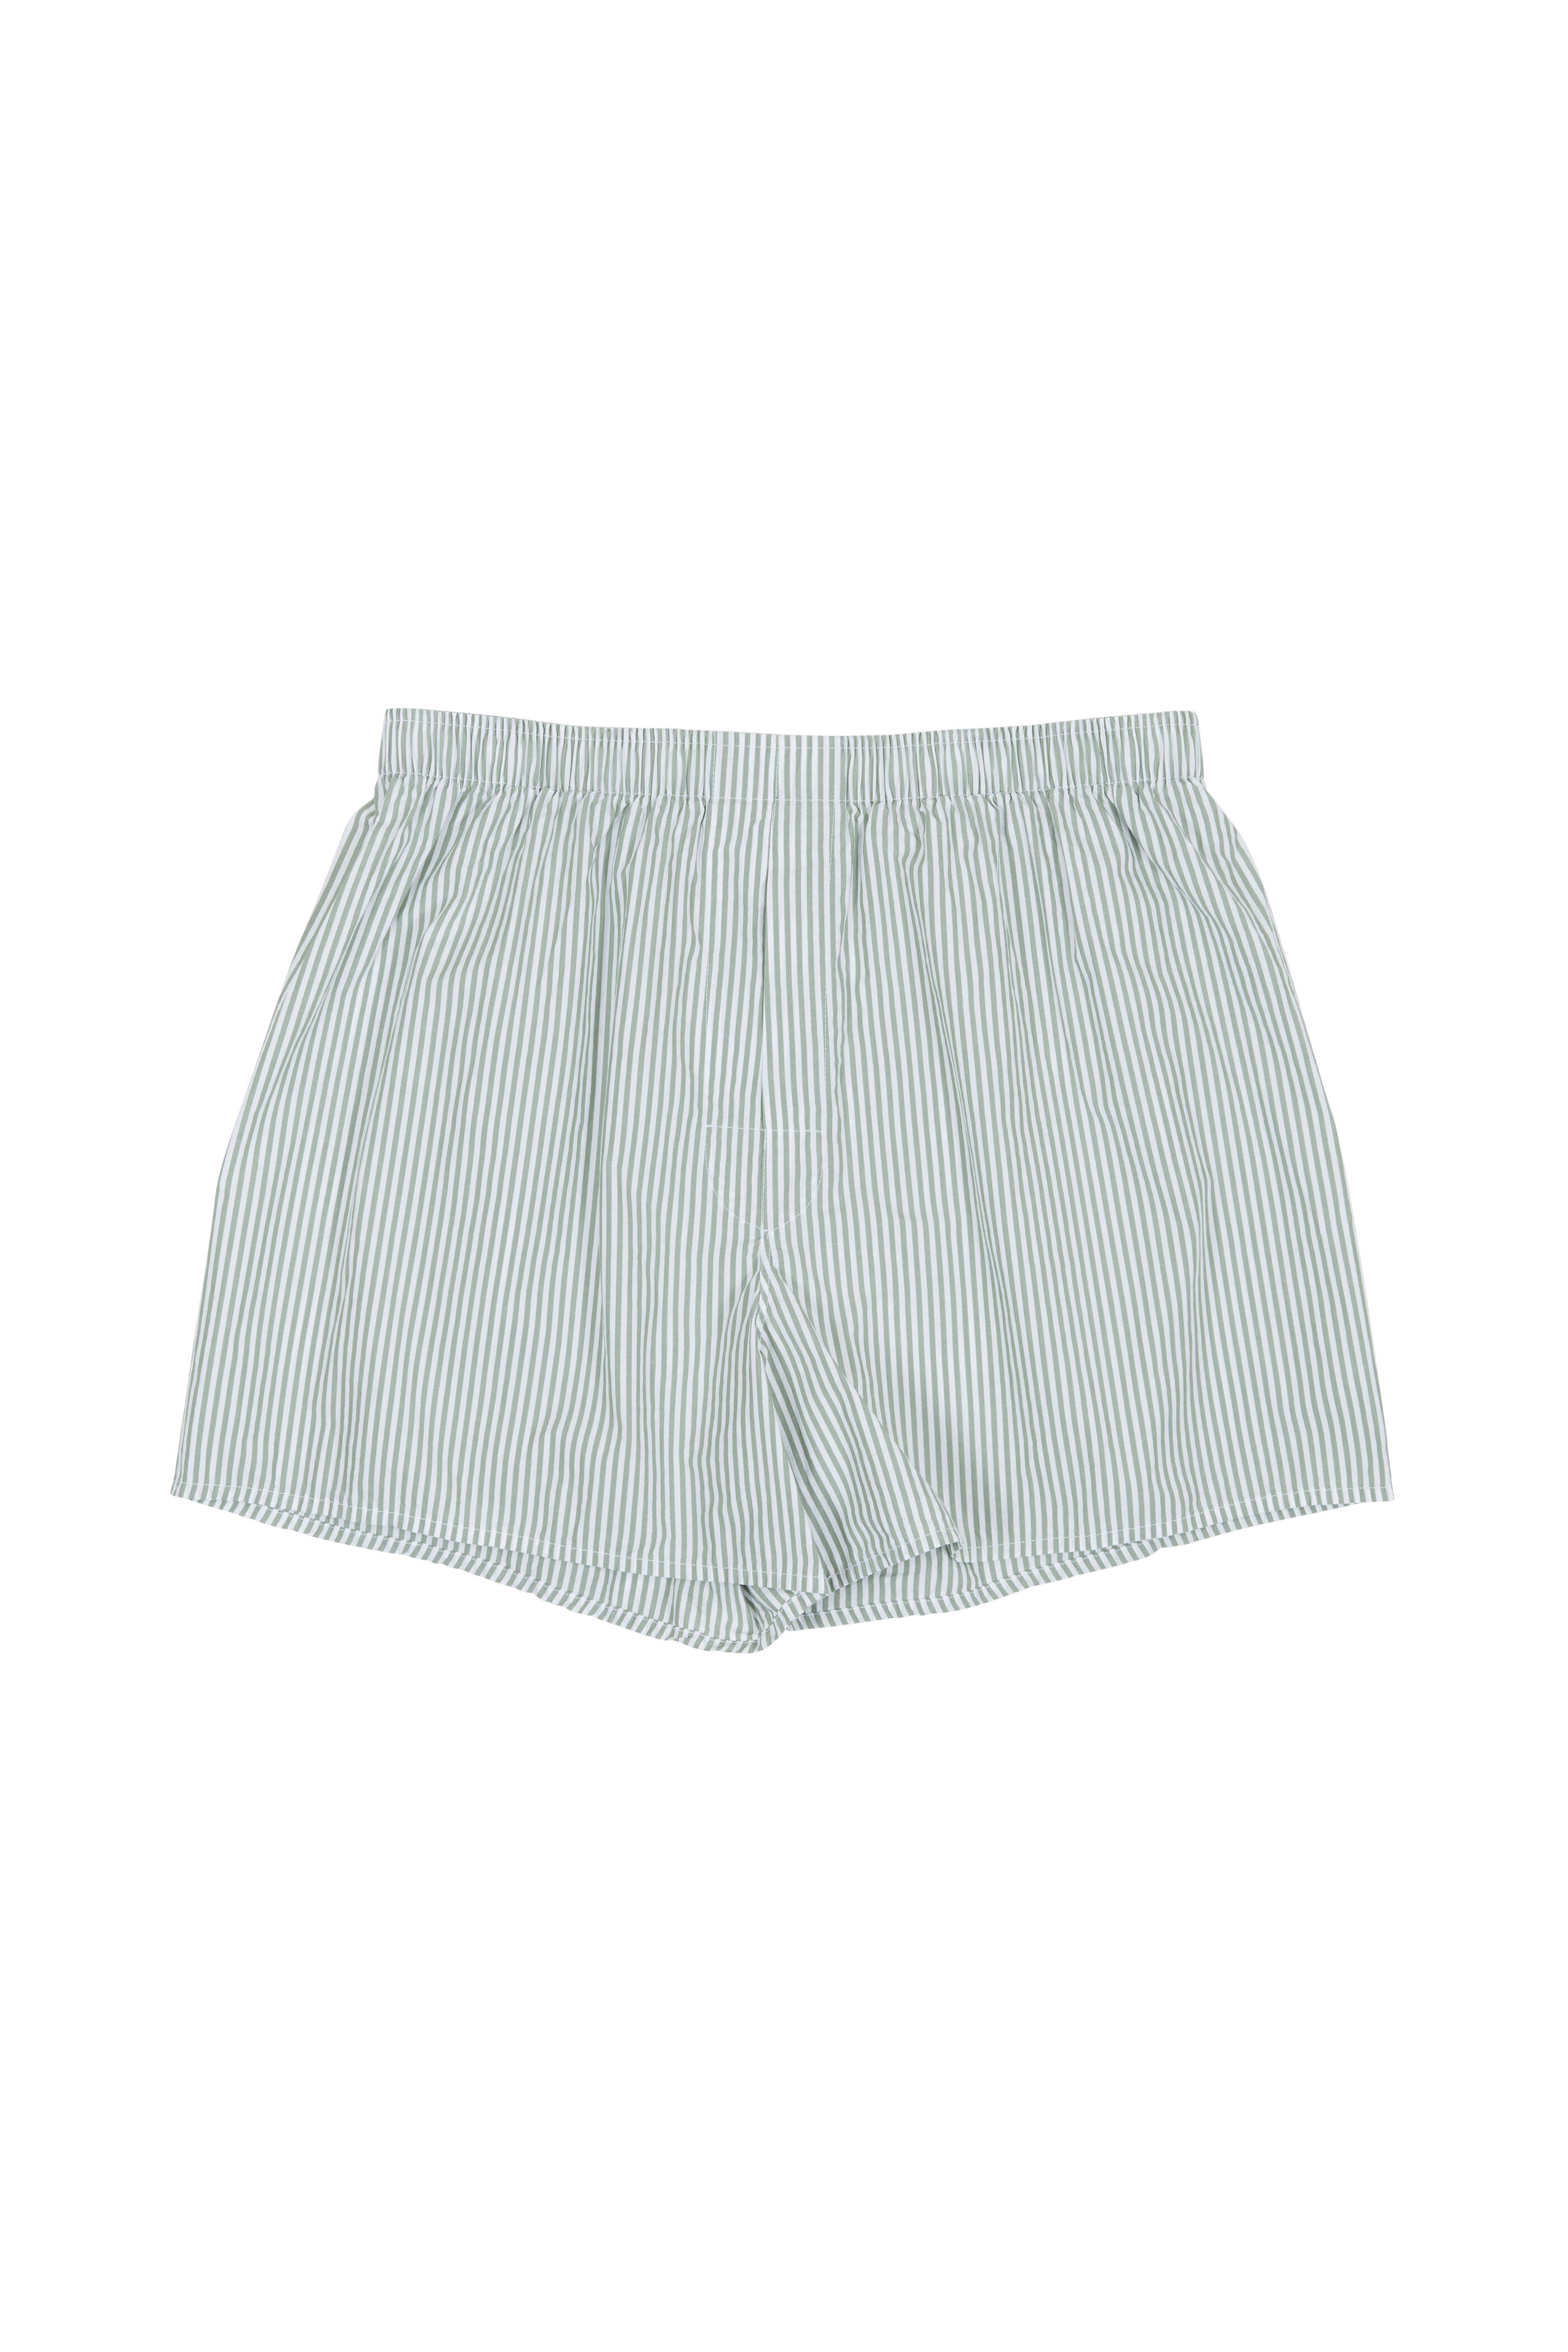 Charlie Dog Boxer Company - The Colin Green & White Striped Boxer Shorts